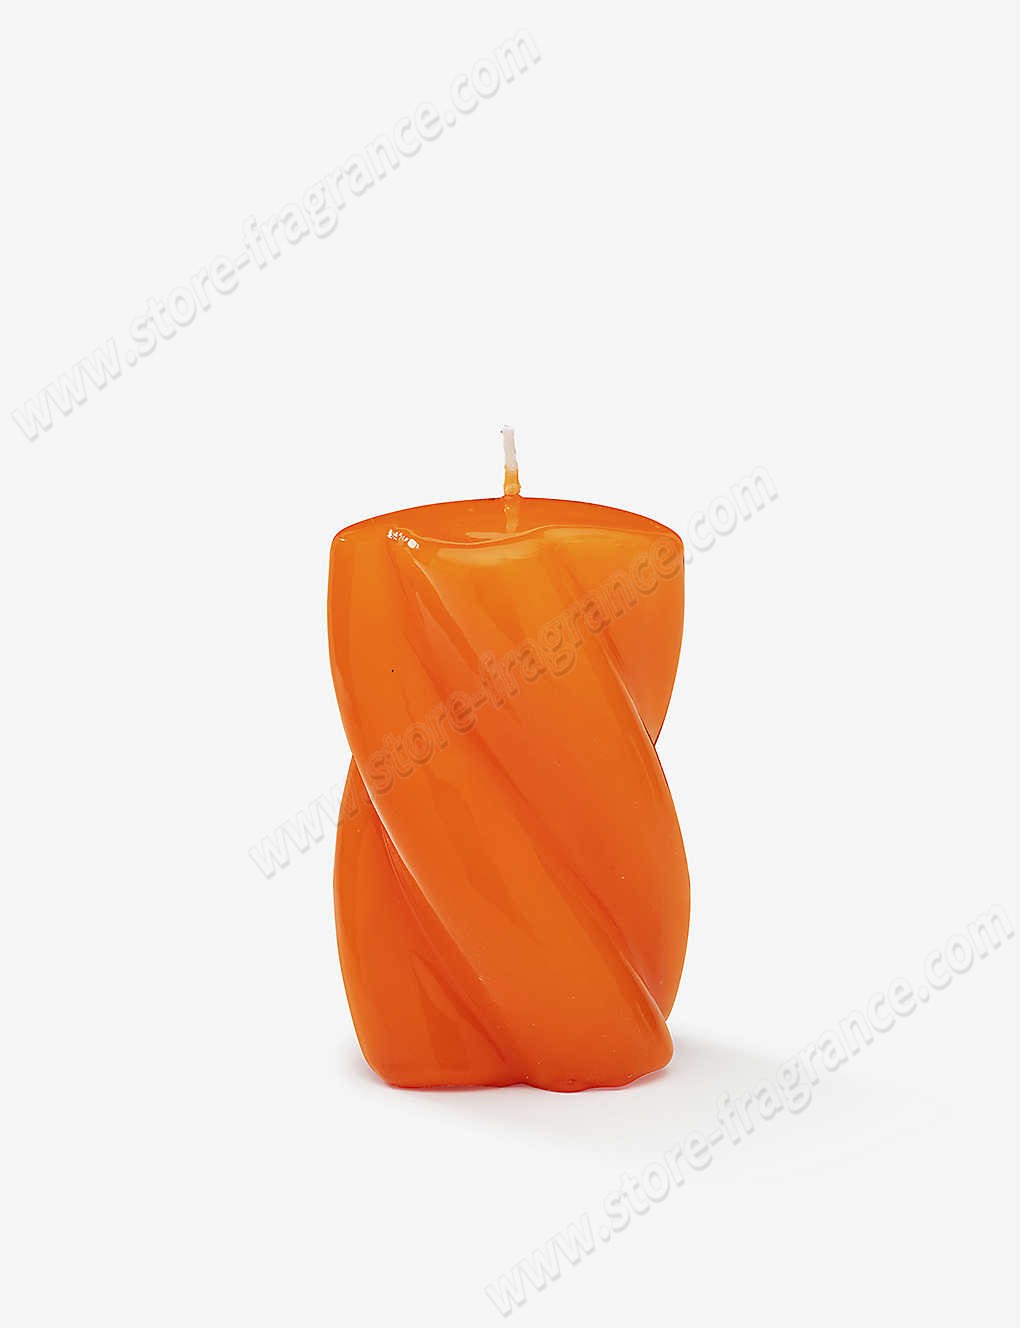 ANNA + NINA/Blunt twisted candle 10cm Limit Offer - -0